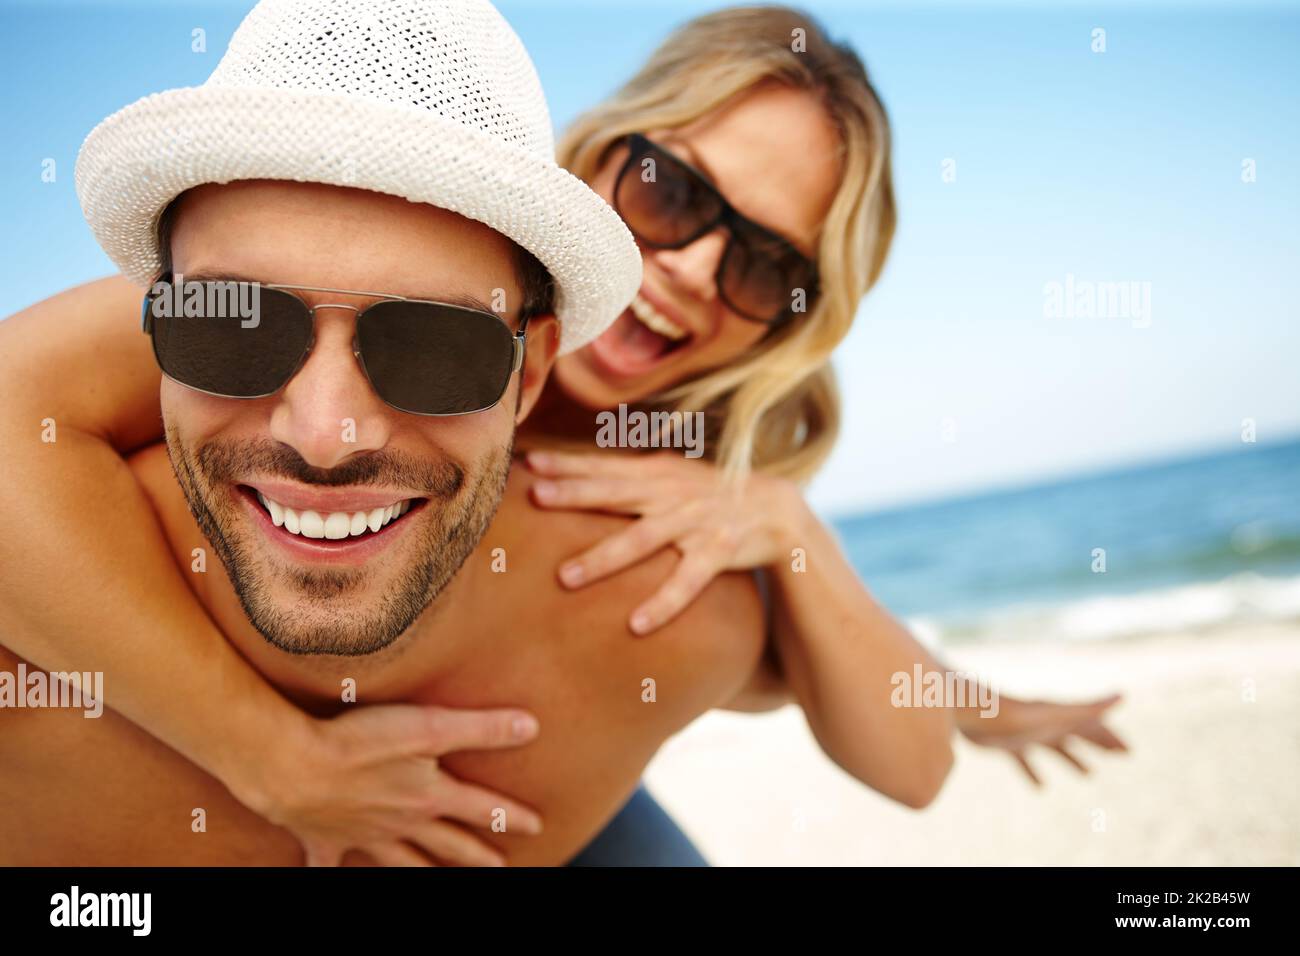 Best vacation EVER. Shot of a smiling young man giving his laughing girlfriend a piggyback on a sunny beach. Stock Photo